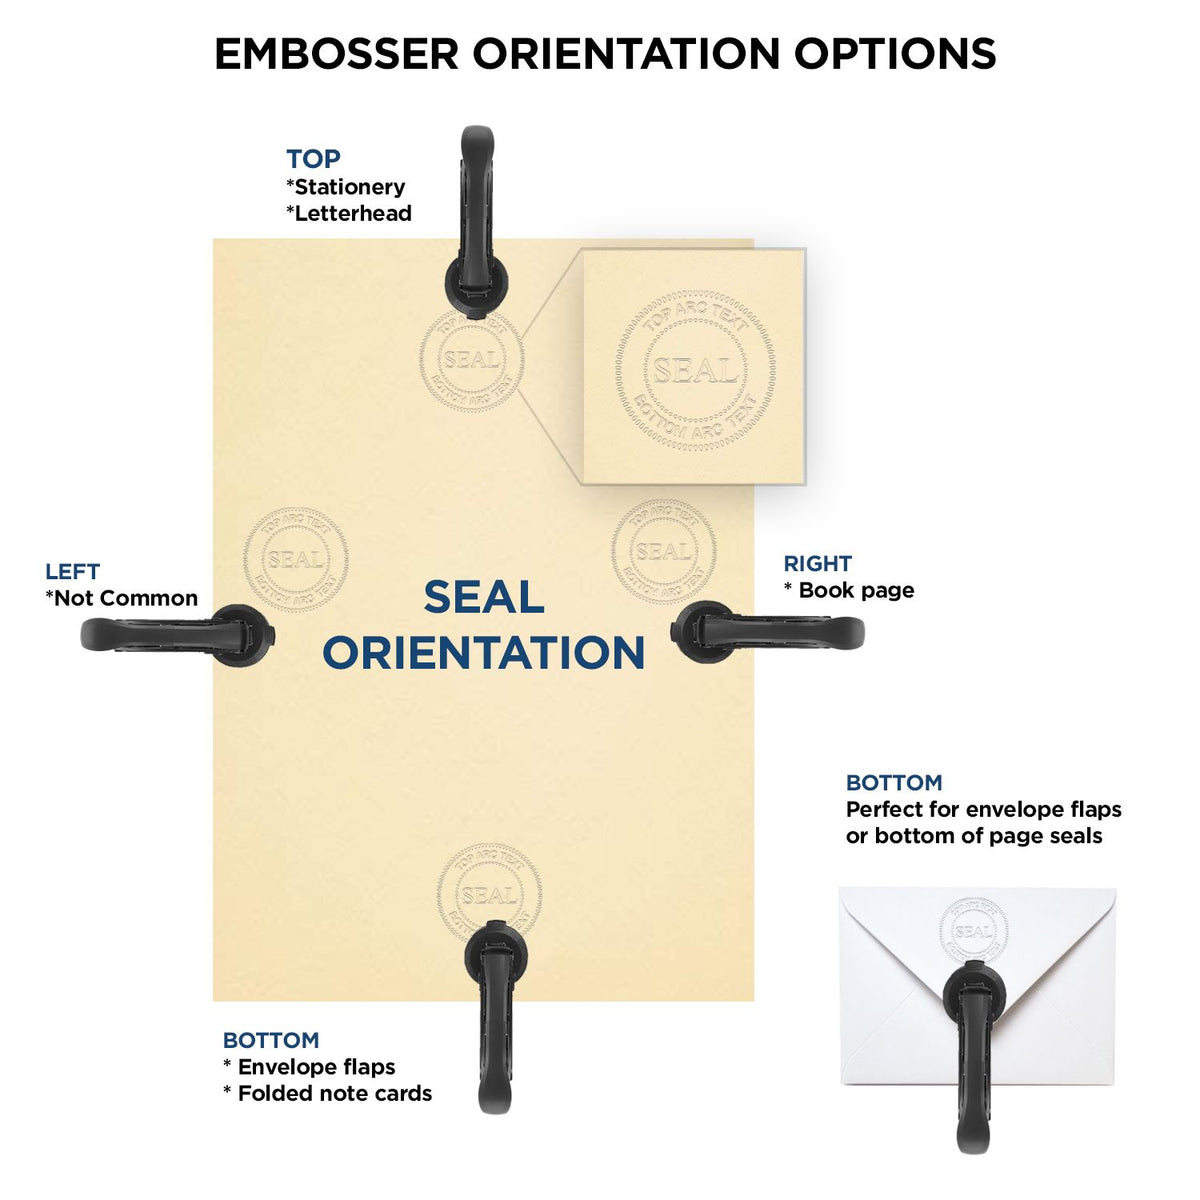 An infographic for the Louisiana Desk Architect Embossing Seal showing embosser orientation, this is showing examples of a top, bottom, right and left insert.